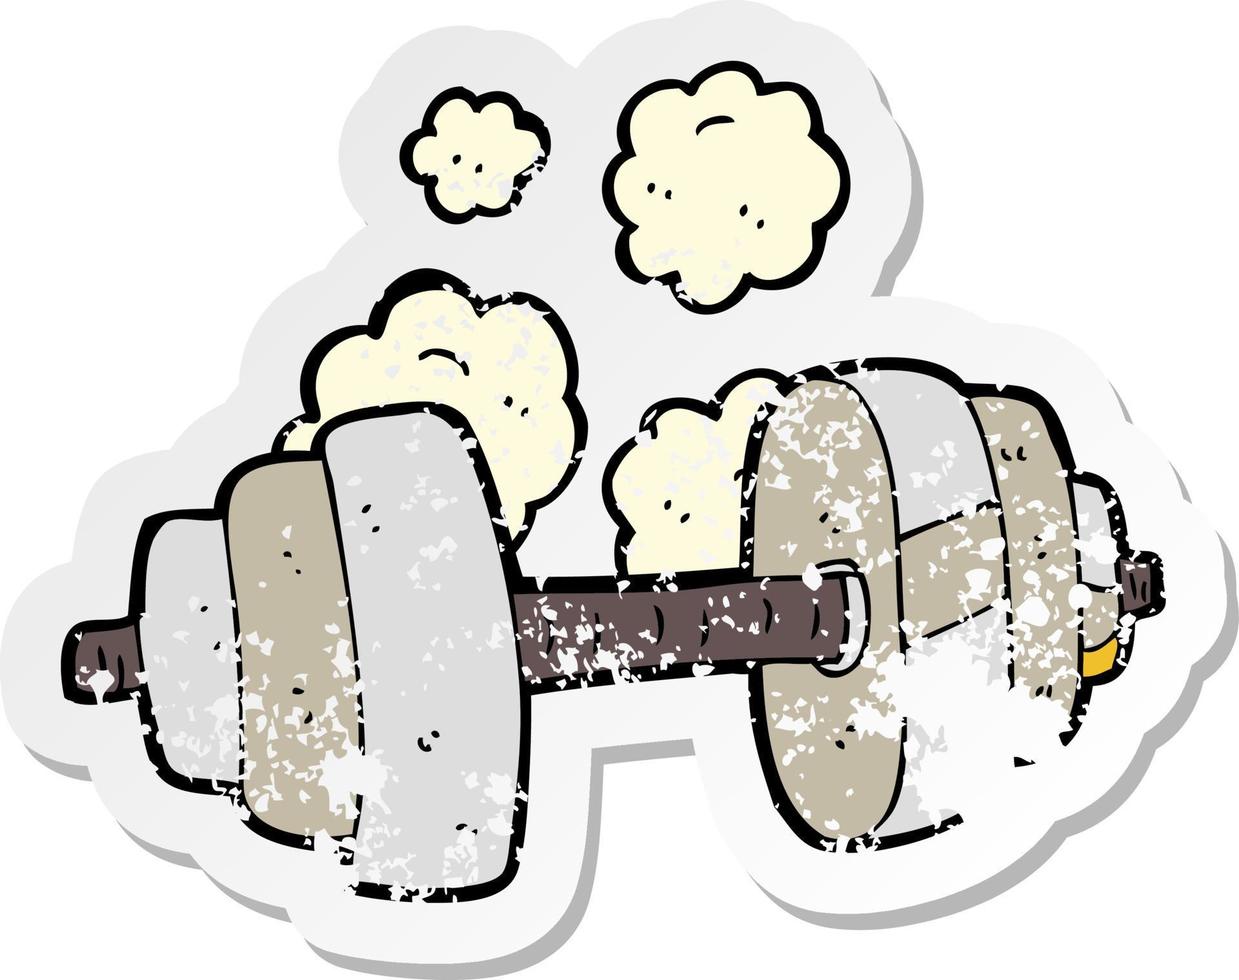 retro distressed sticker of a cartoon dumbbell vector